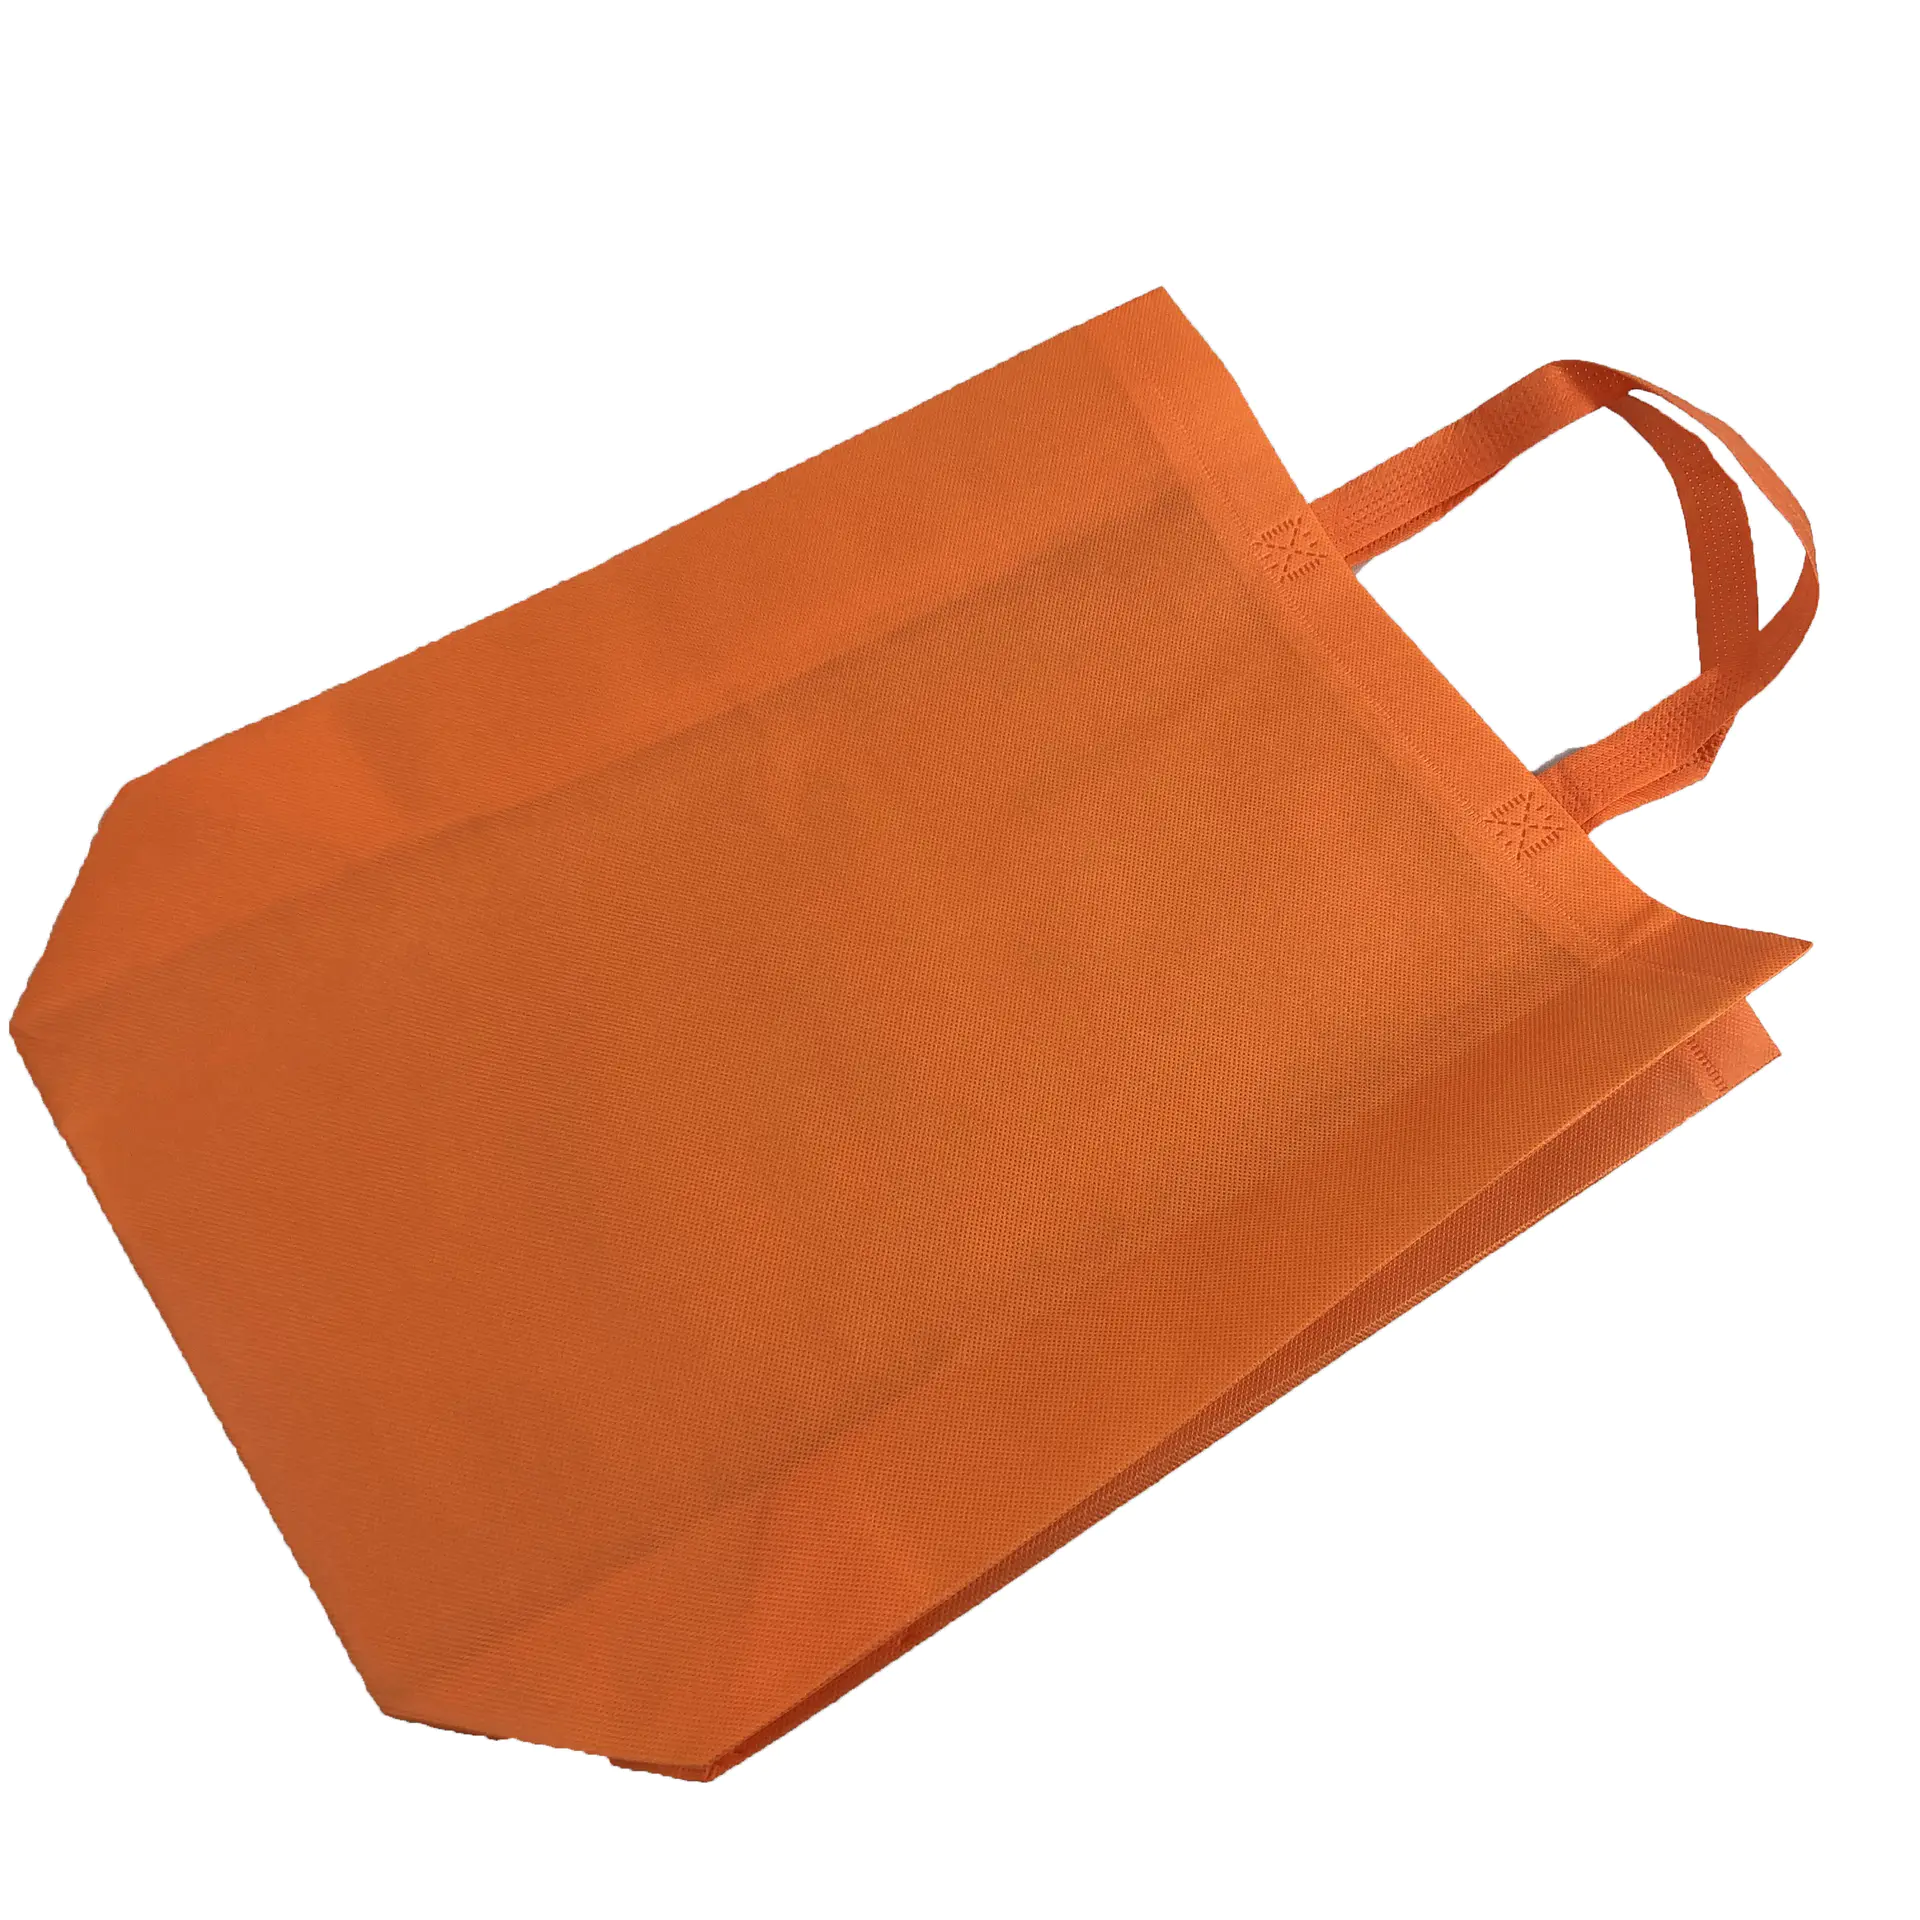 Factory low price direct selling pp spunbond non woven color handbag